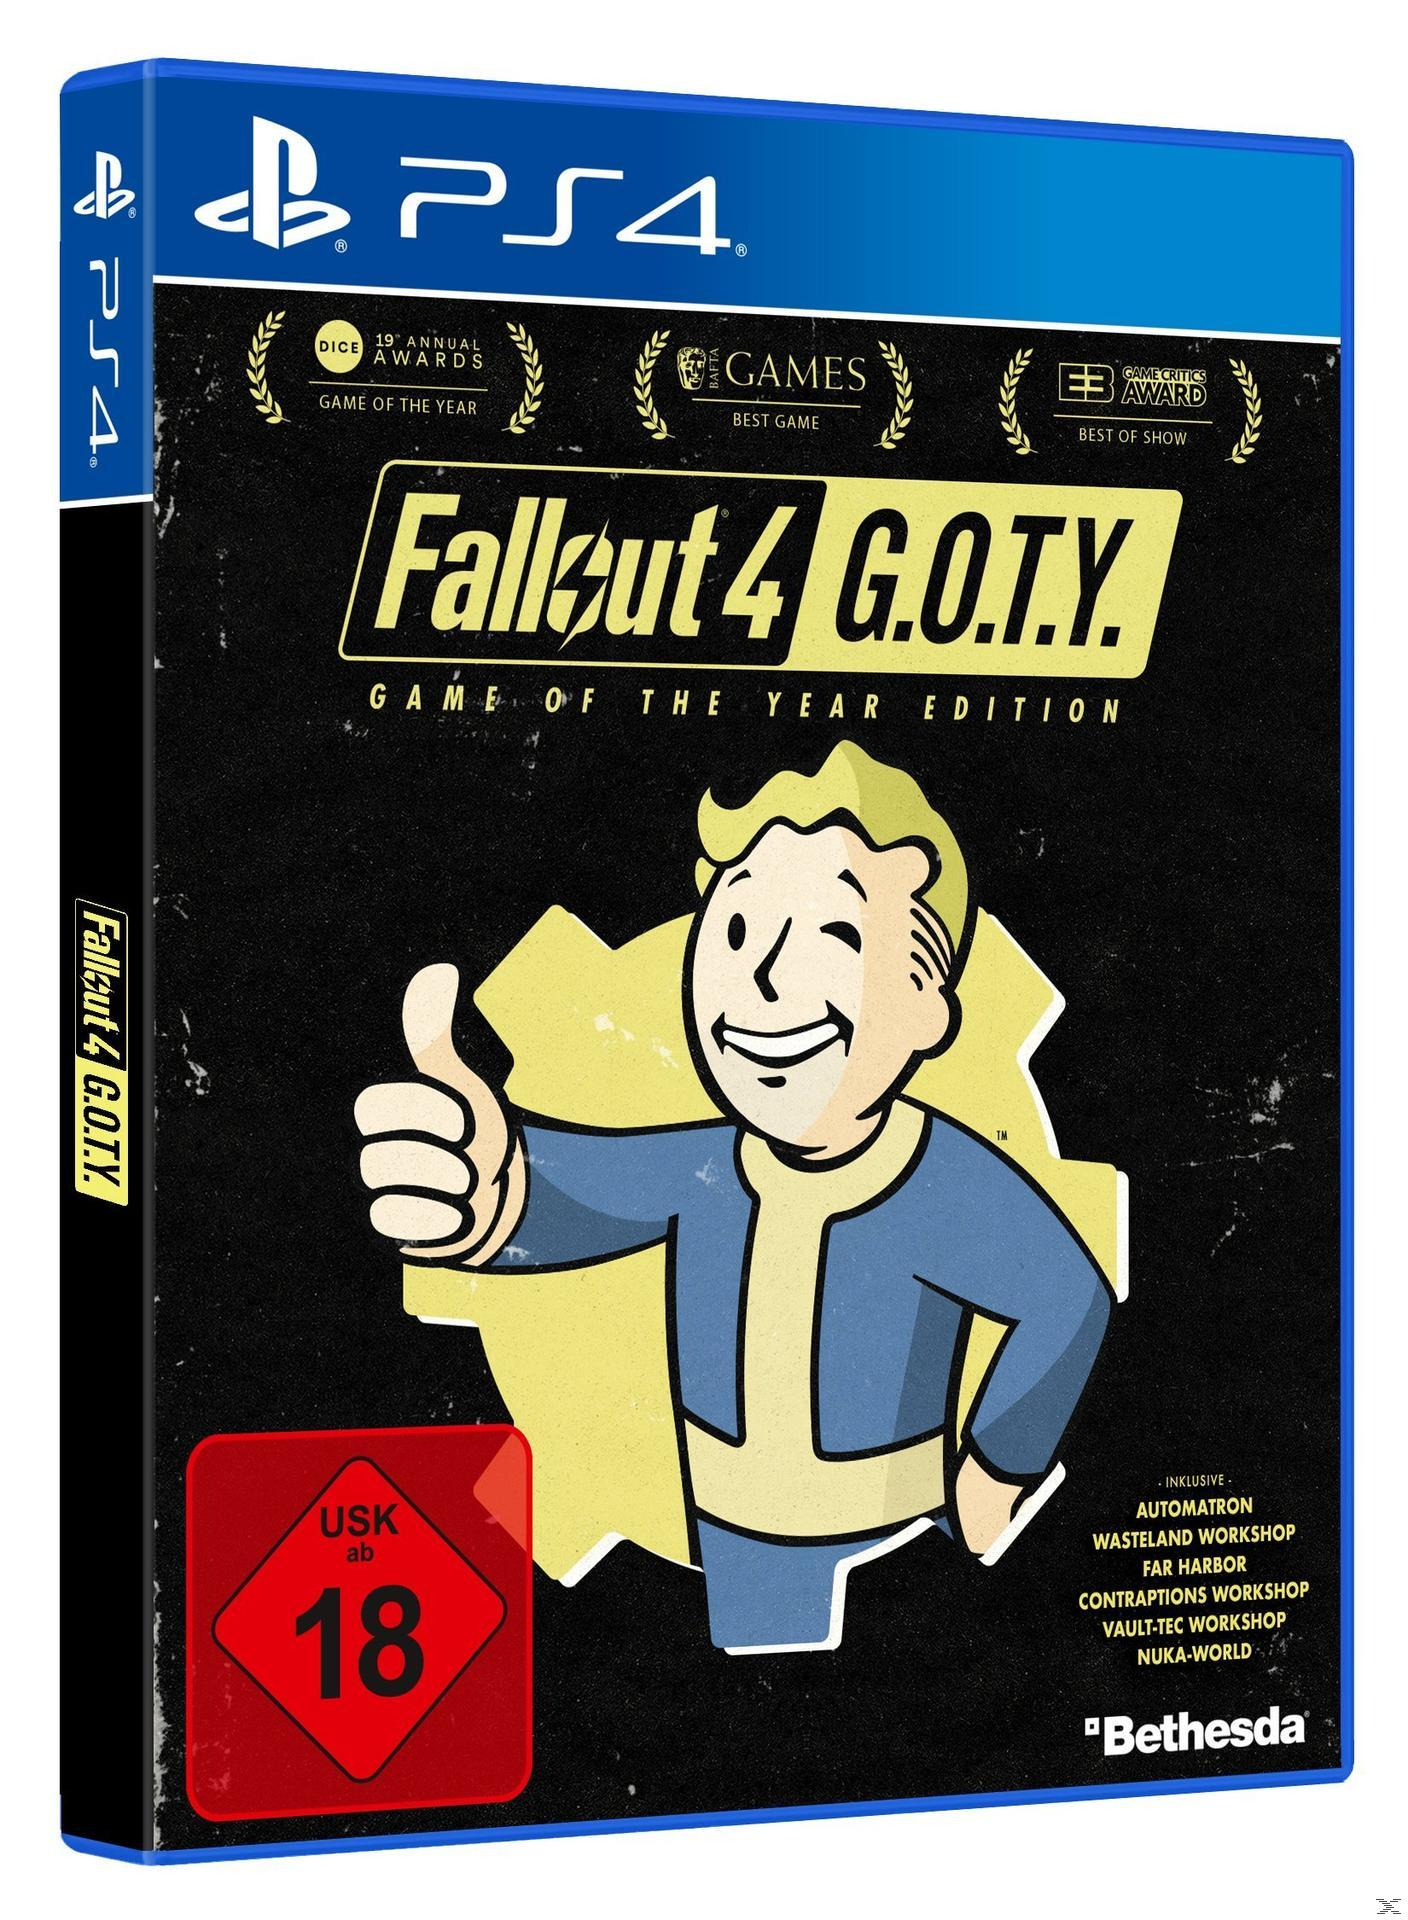 Year [PlayStation Fallout Edition the 4: - 4] Game of